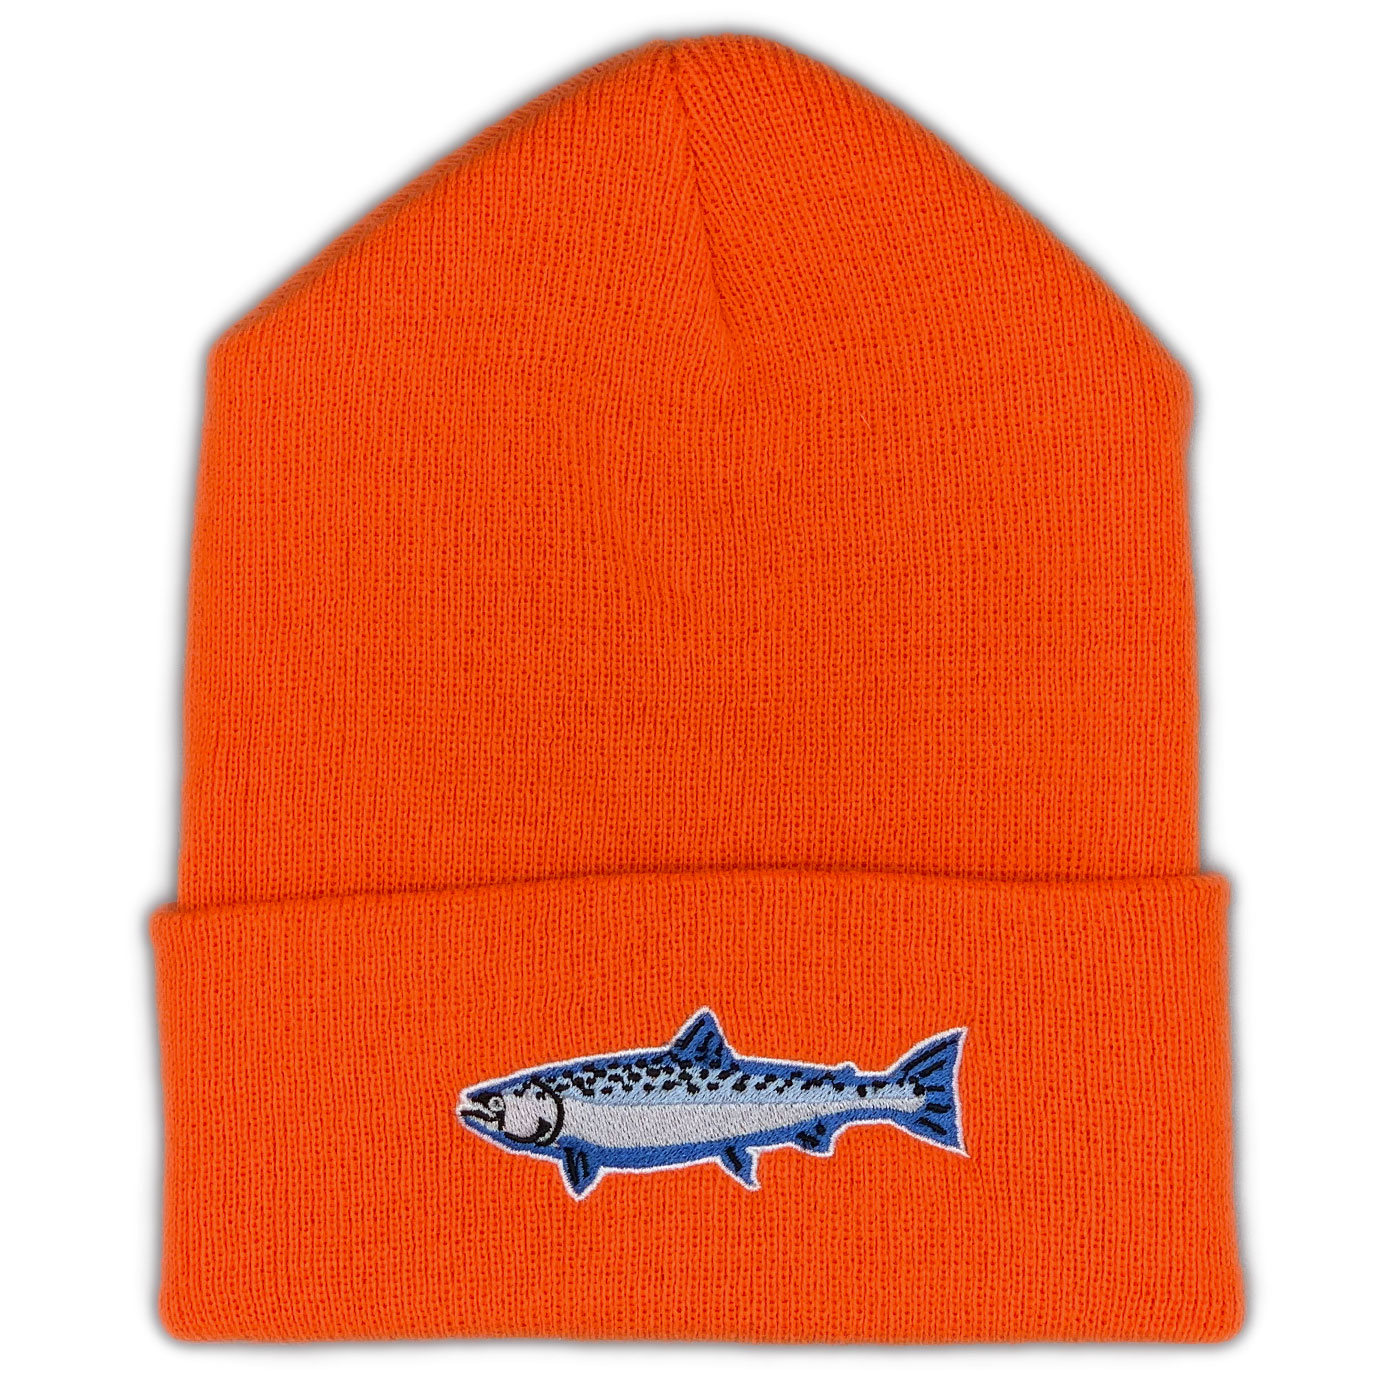 https://slackwaterapparel.com/collections/beanies/products/spruce-green-king-salmon-beanie